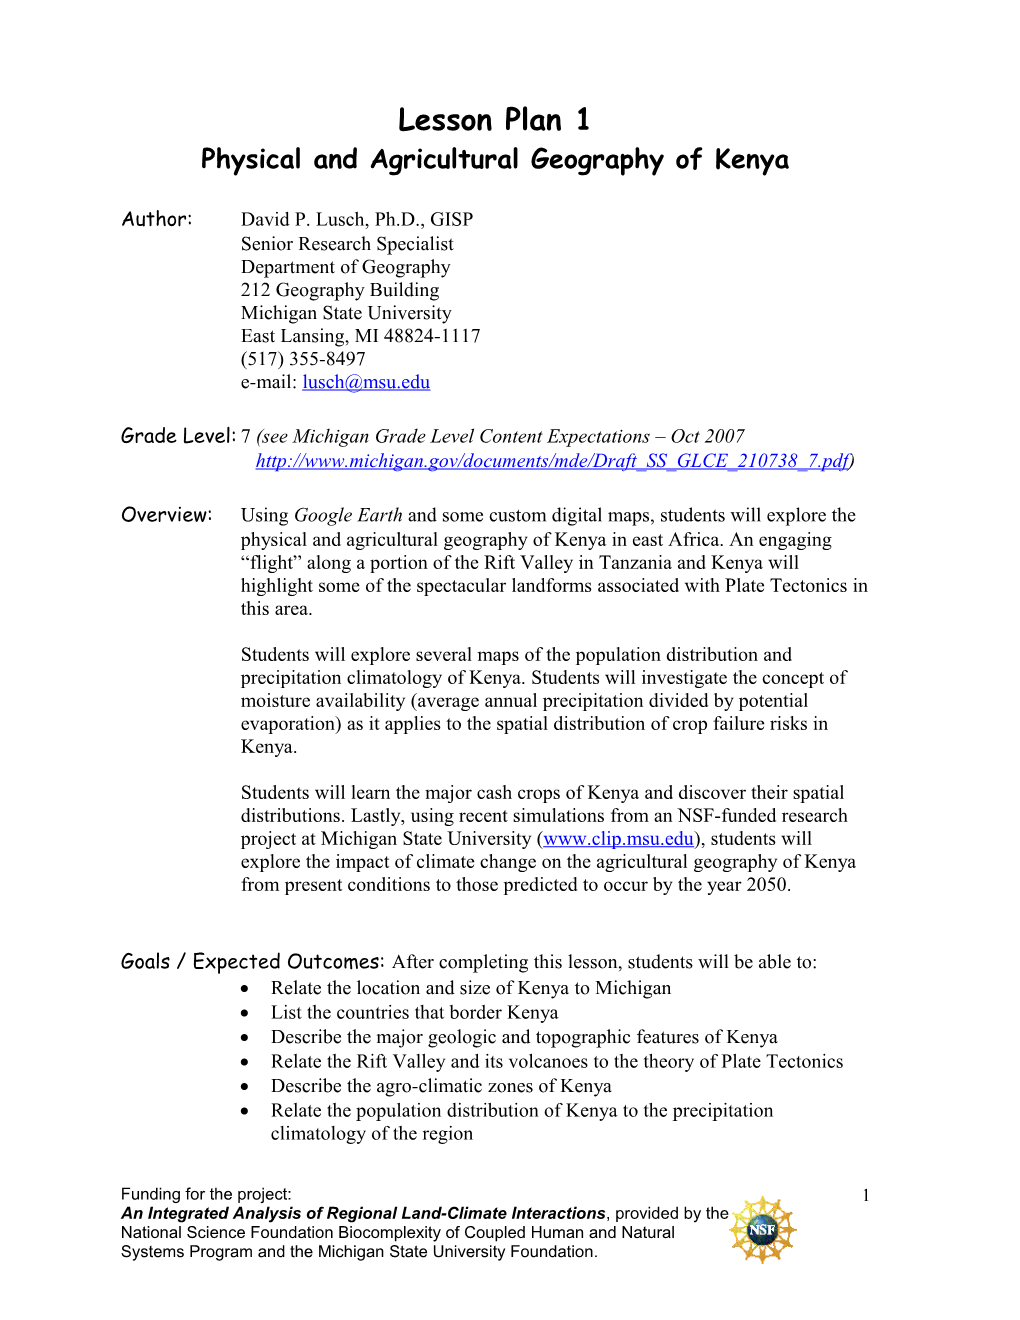 Physical and Agricultural Geography of Kenya